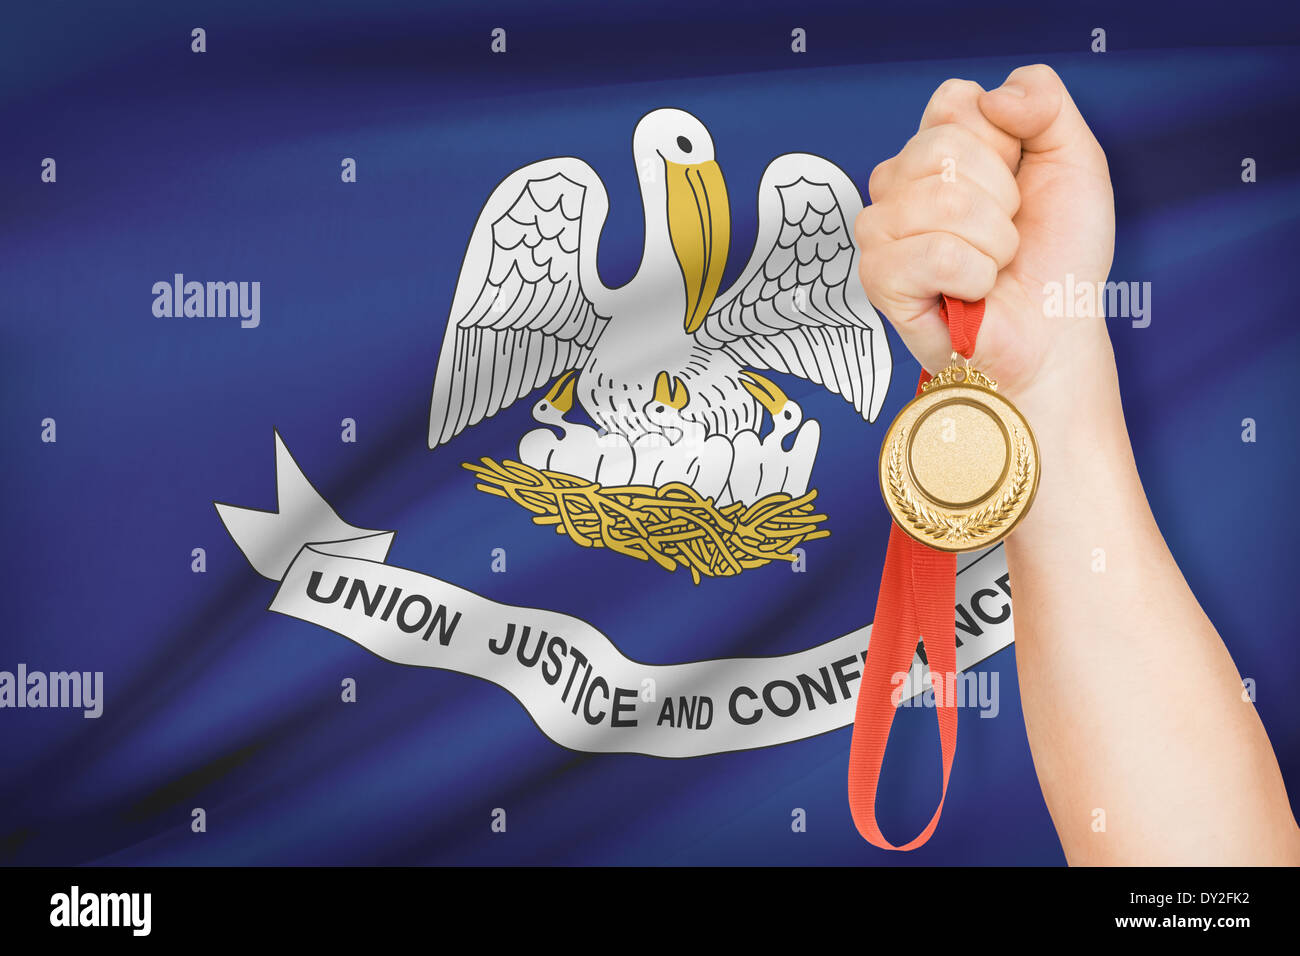 Sportsman holding gold medal with State of Louisiana flag on background. Part of a series. Stock Photo